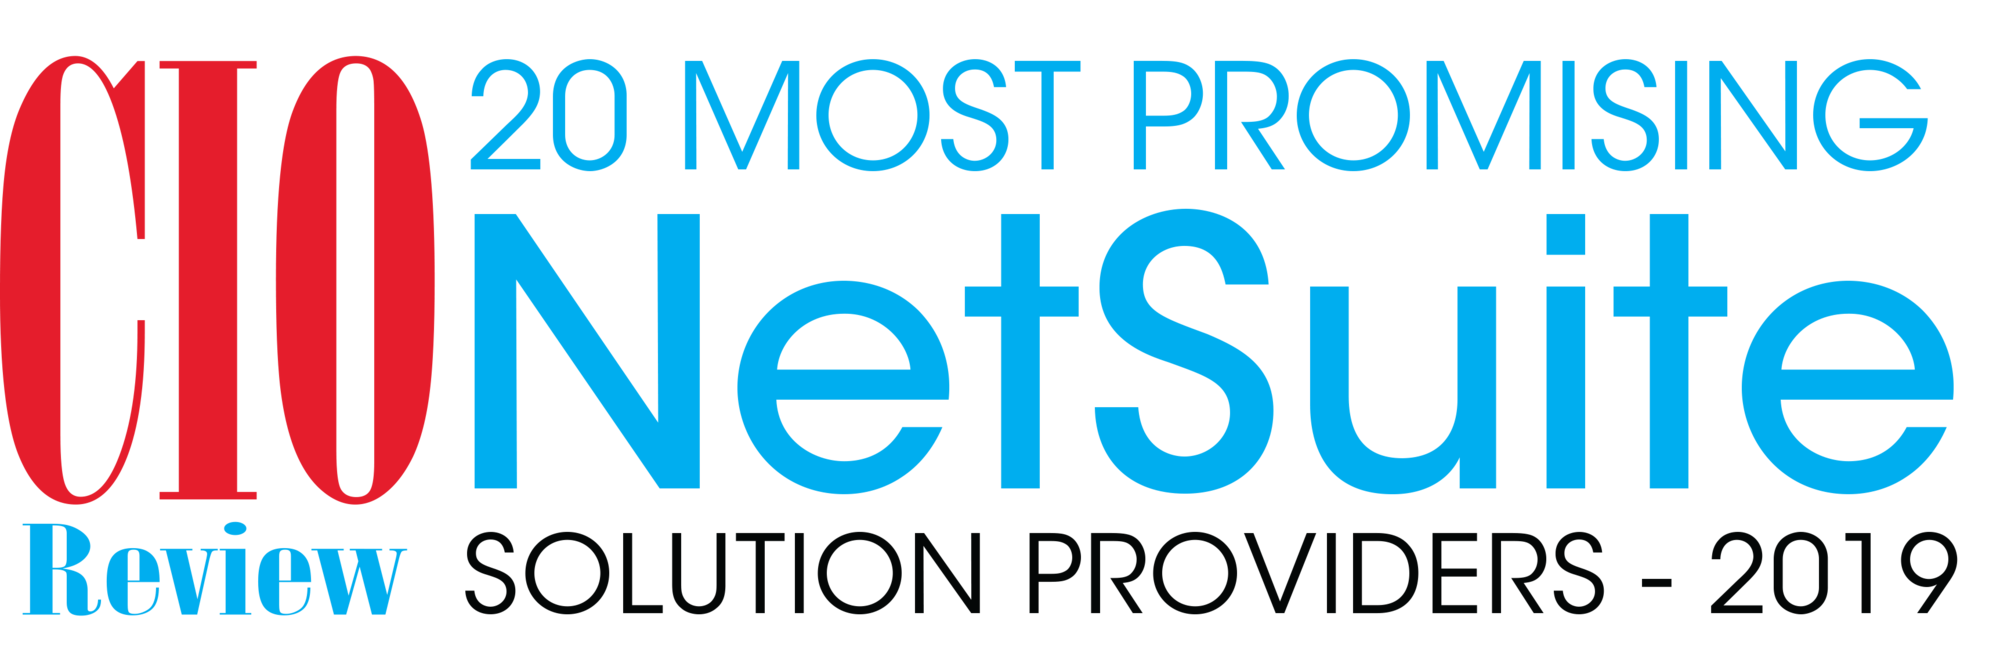 20 Most Promising NetSuite Solution Providers 2019